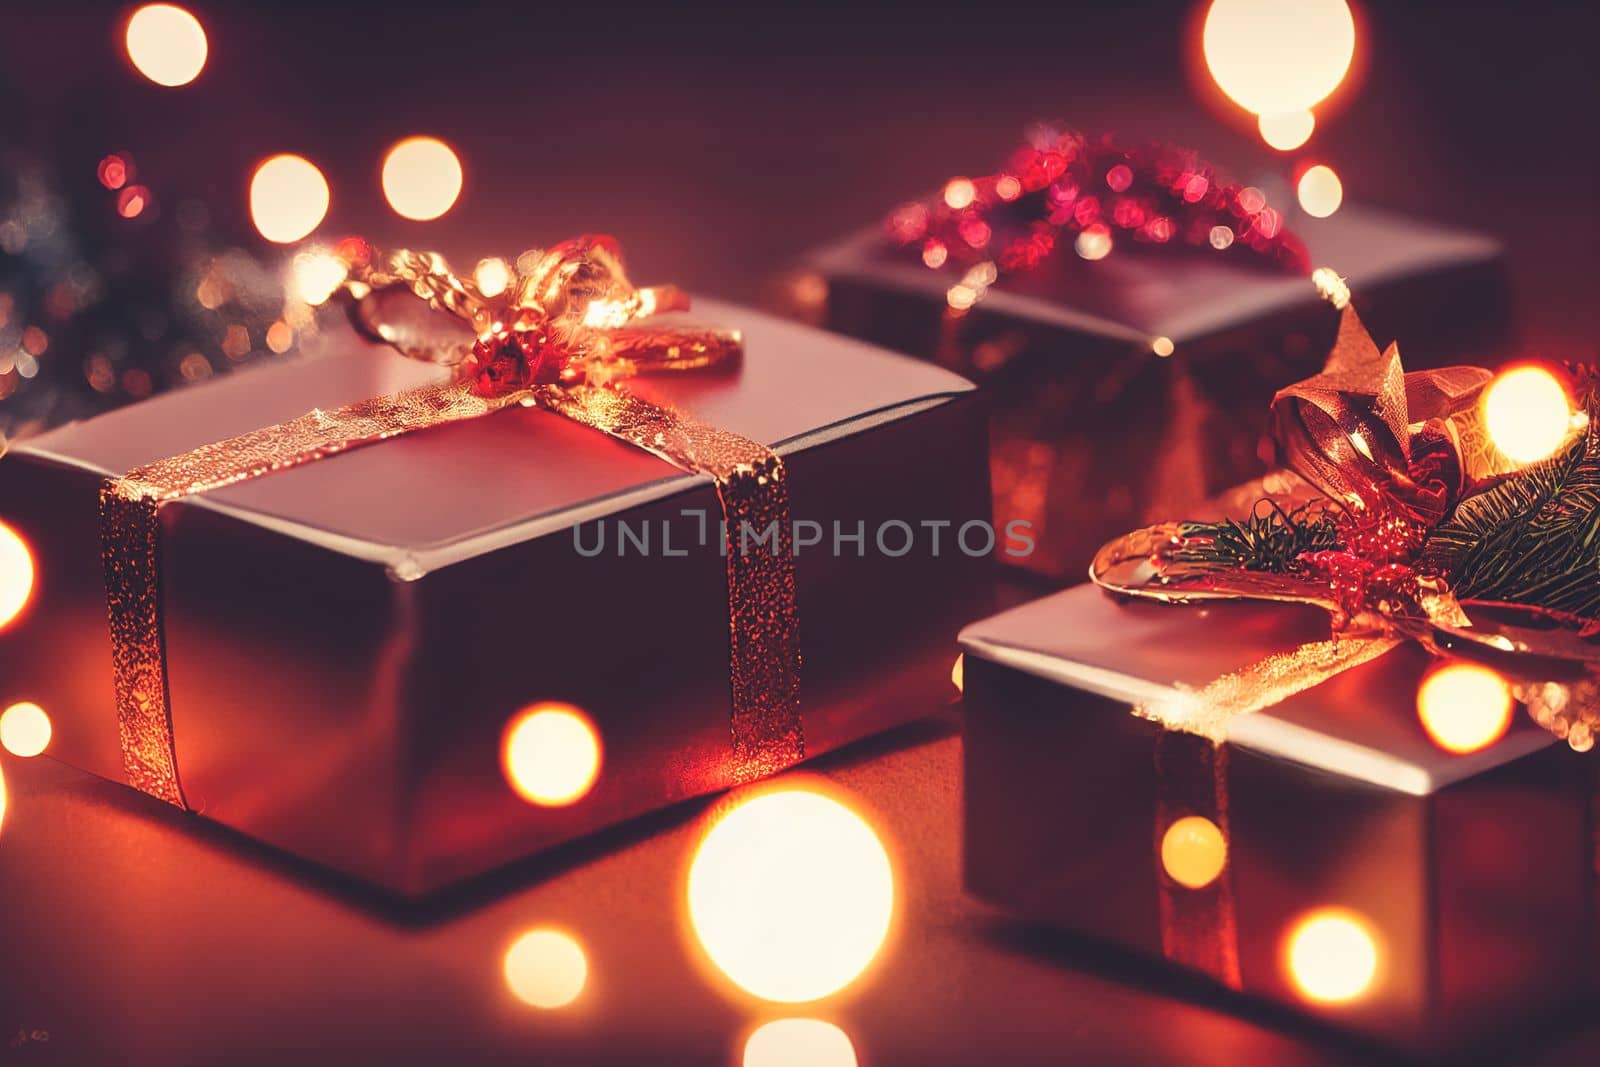 Many gift boxes for merry christmas and new year 2023 spectacular celebration with decorative ornate on the gift to be present to family and friends on christmas day. AI generated image.